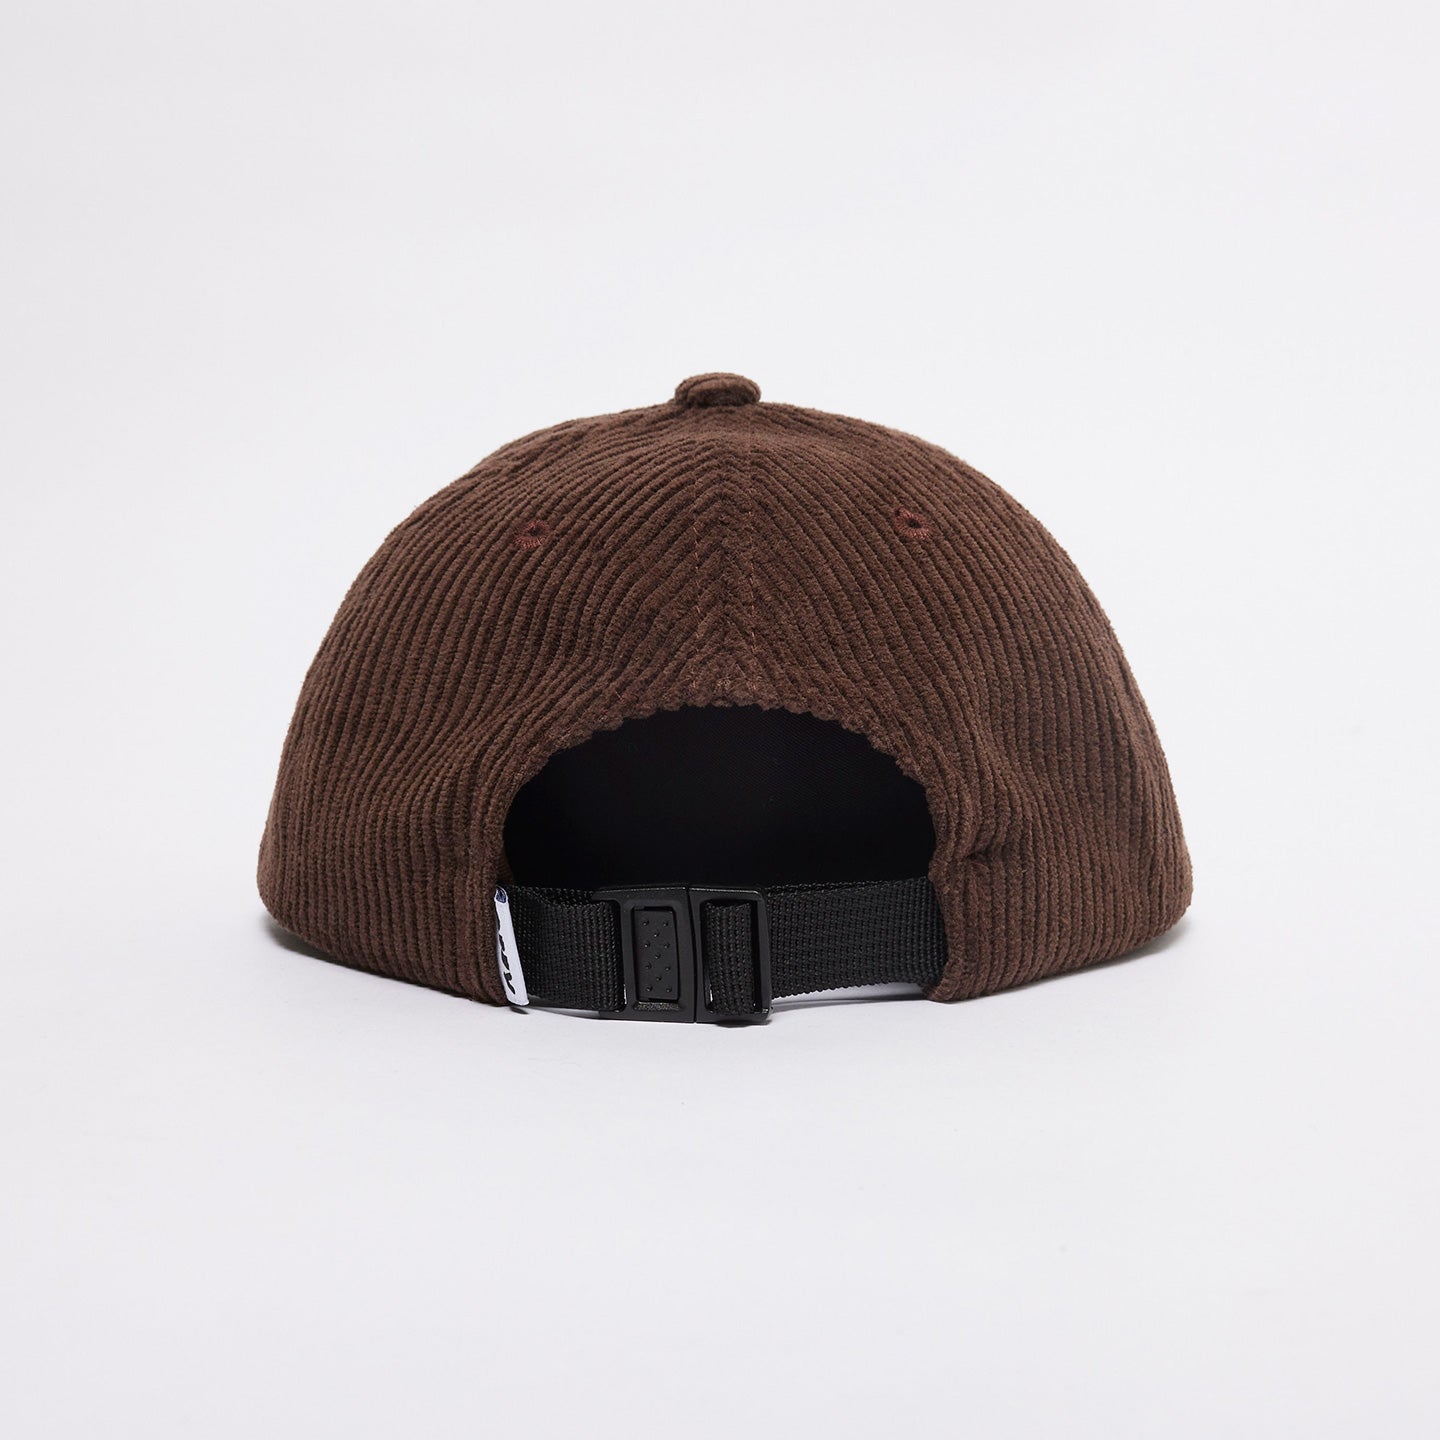 OBEY CORD LABEL 6 PANEL STRAP BROWN